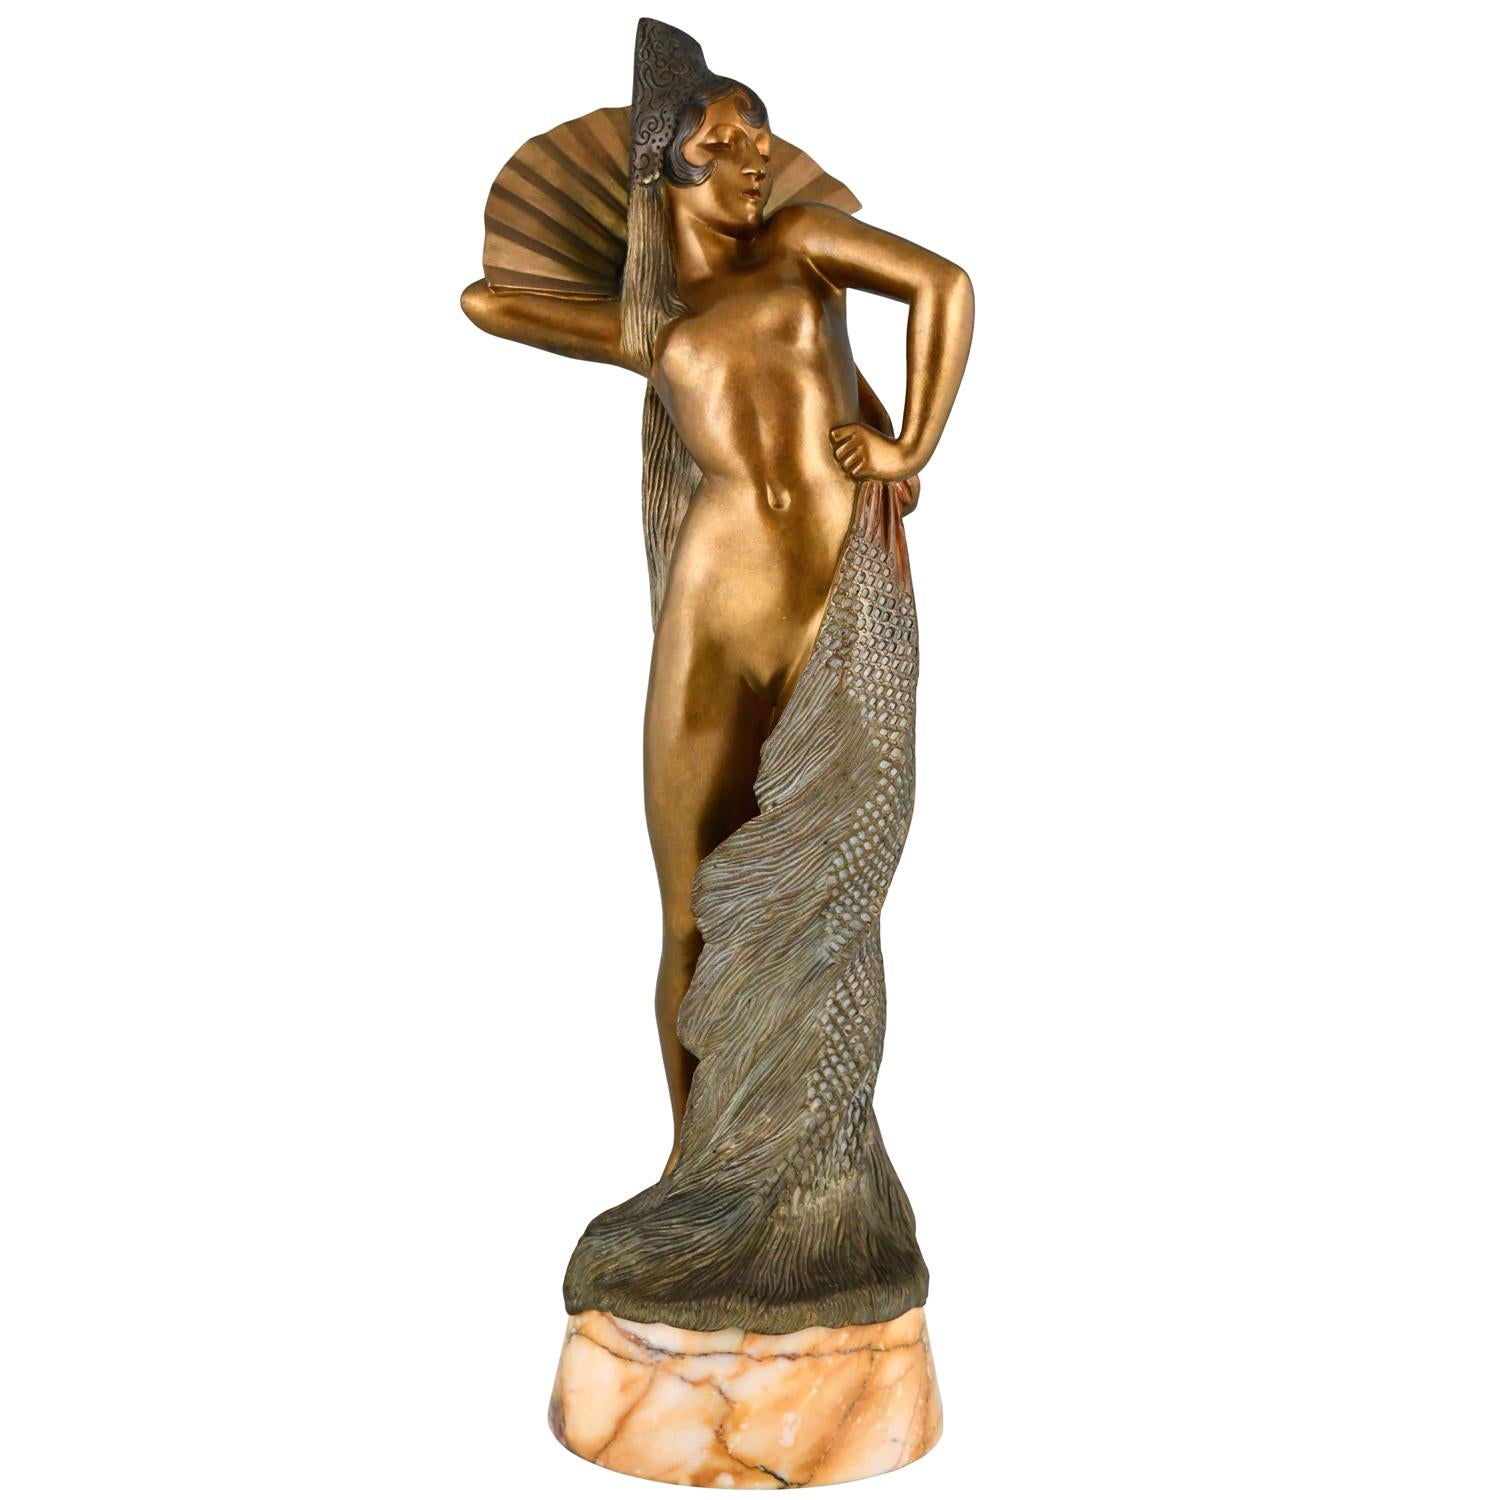 Art Deco bronze sculpture of a Spanish dancer by Maurice Guiraud Rivière.
The sculpture is cast in bronze, has a beautiful multi color patina and stands on a marble base. 
France ca. 1925